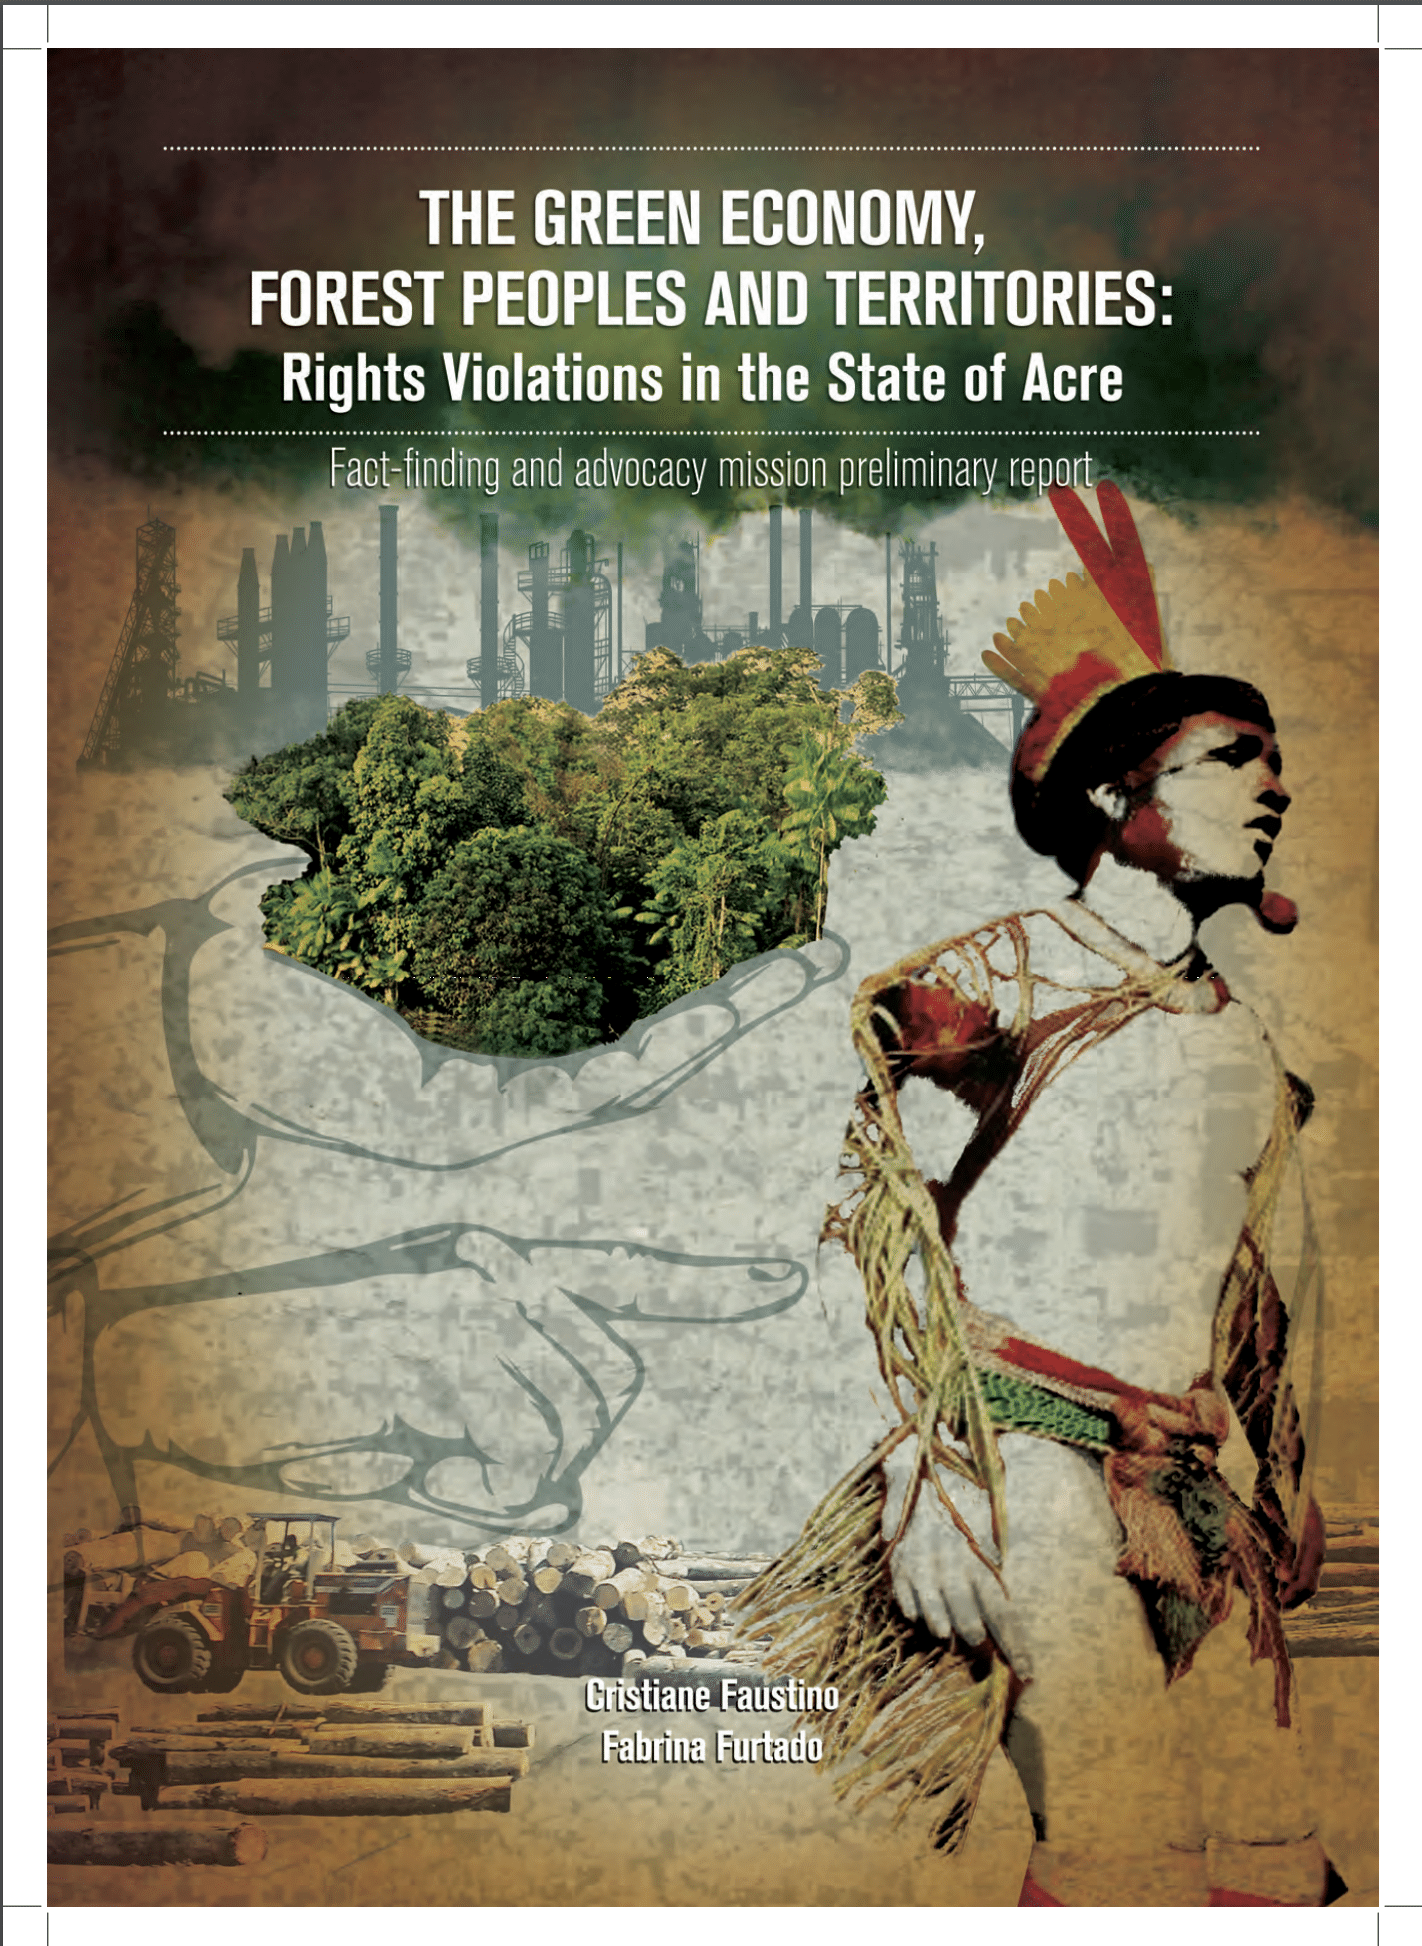 The green economy, forest peoples and territories